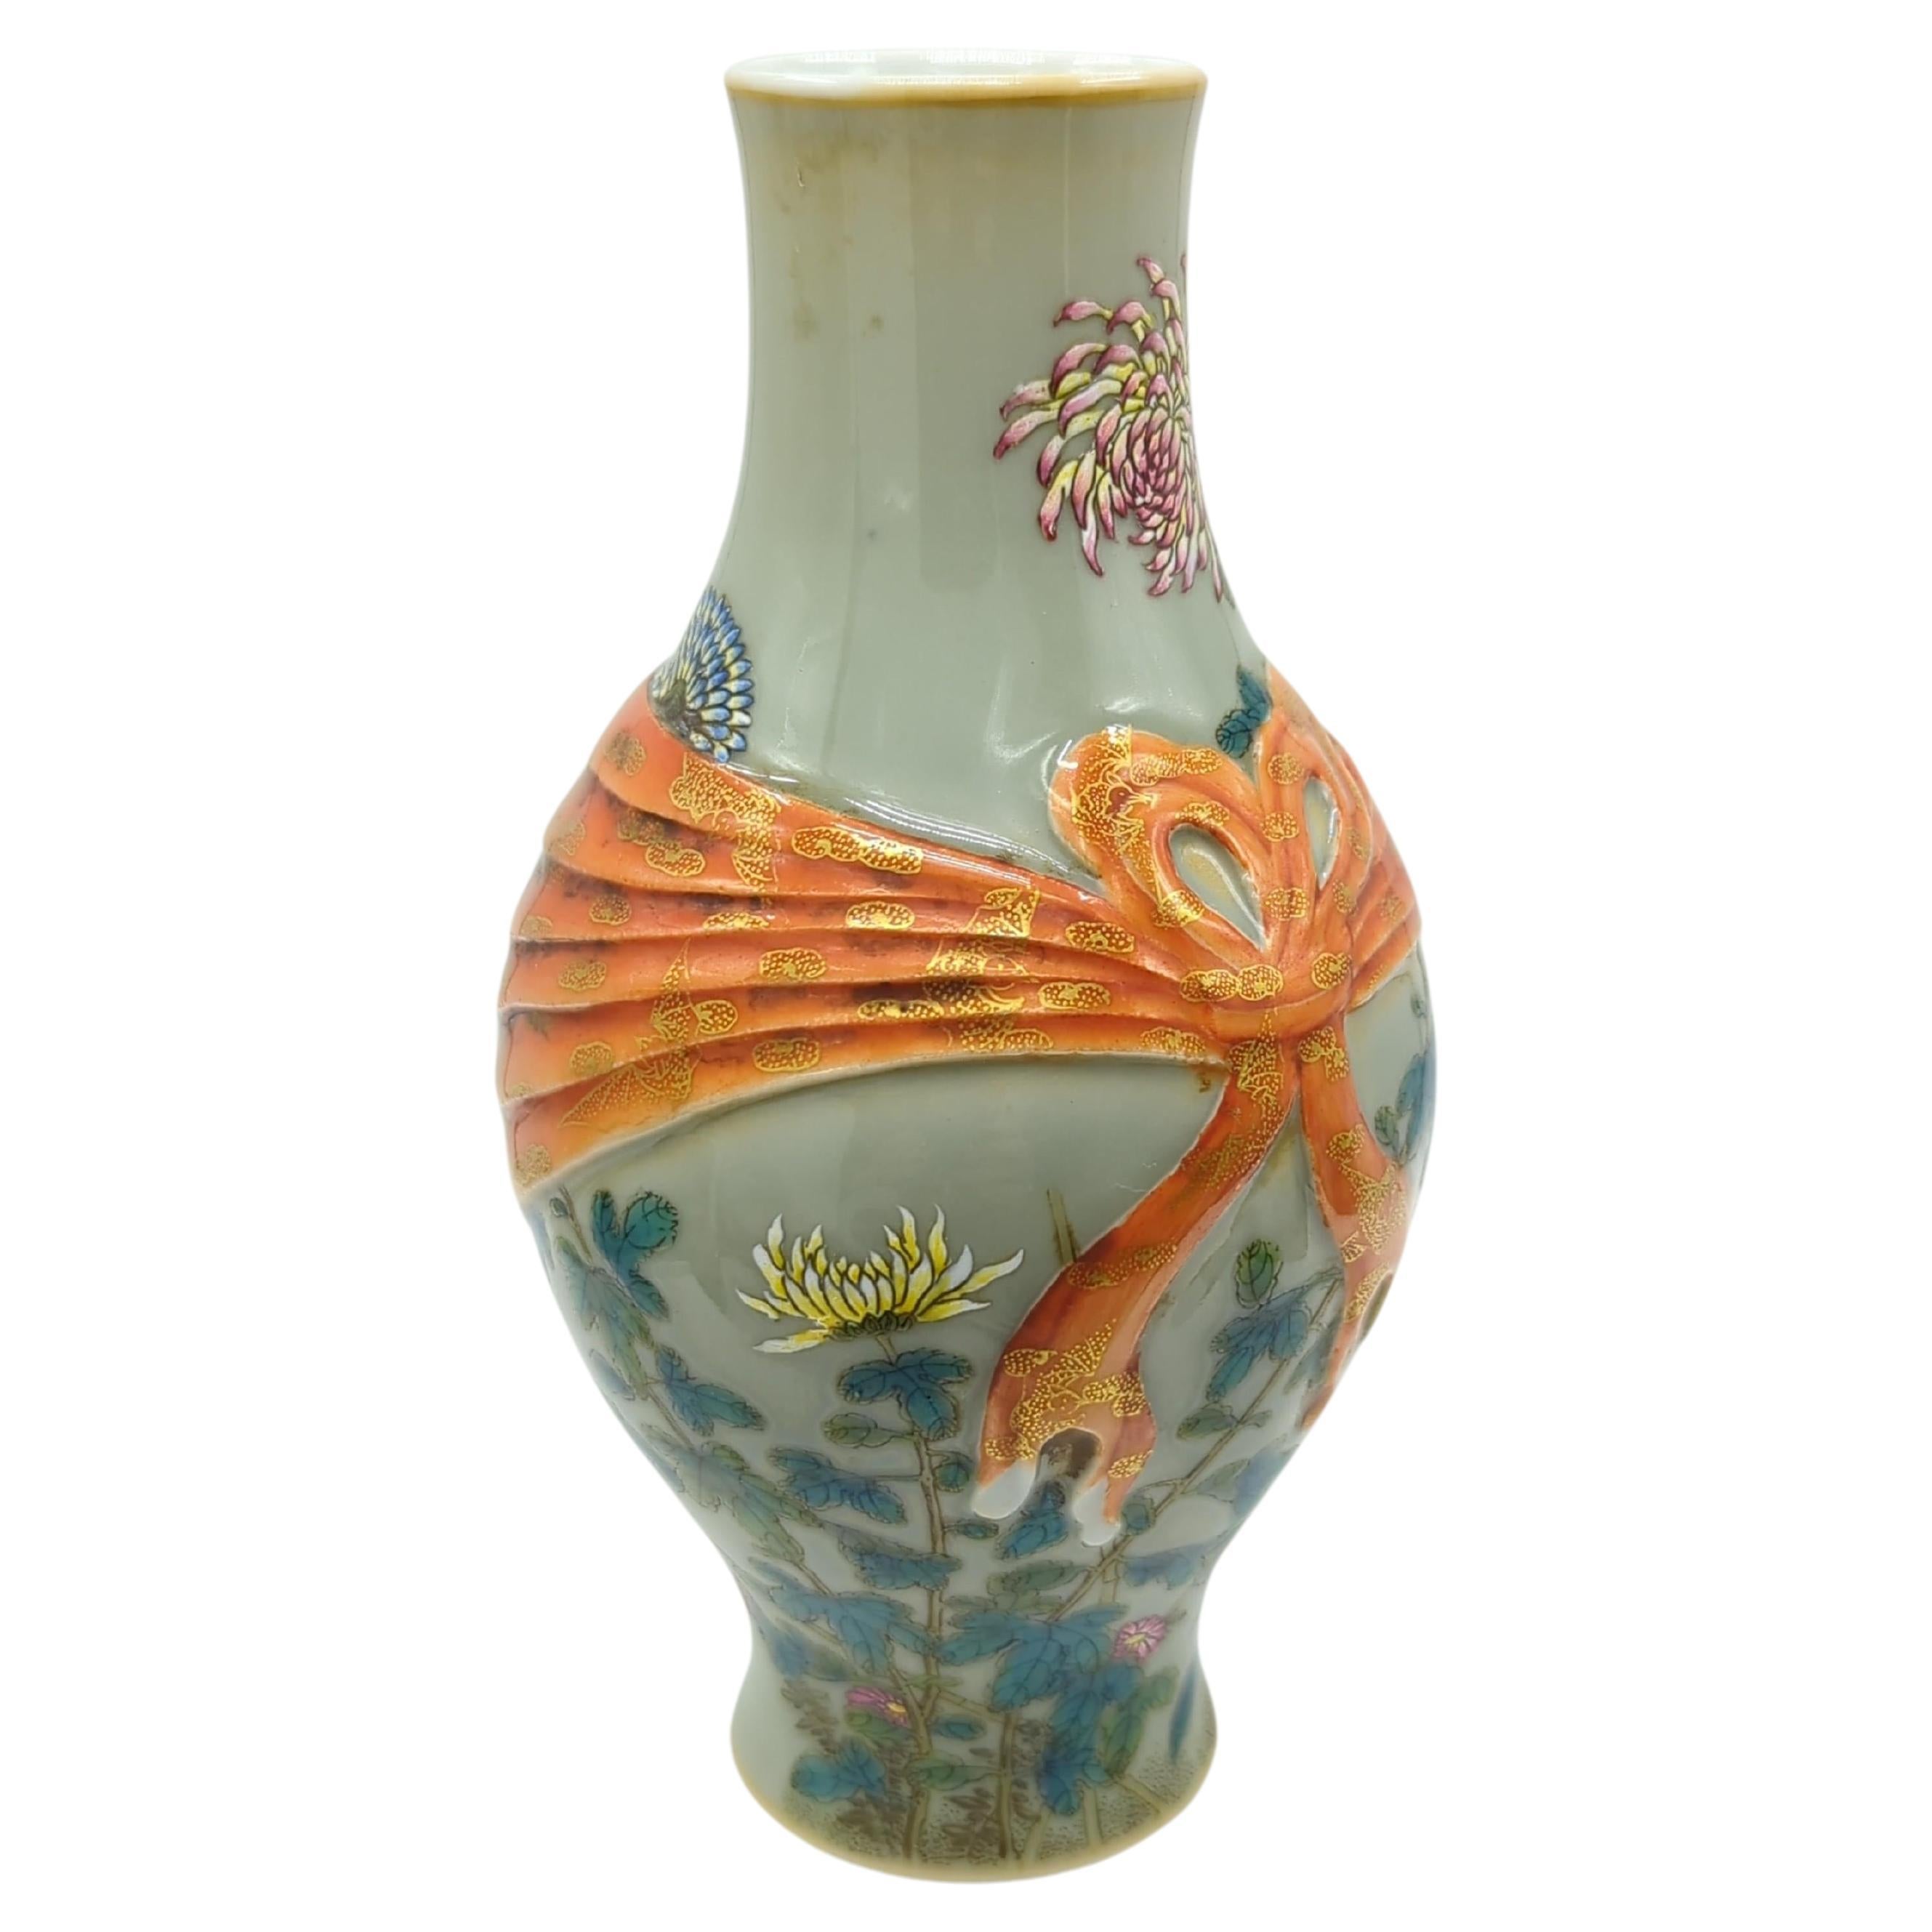 A fine Chinese porcelain vase in 